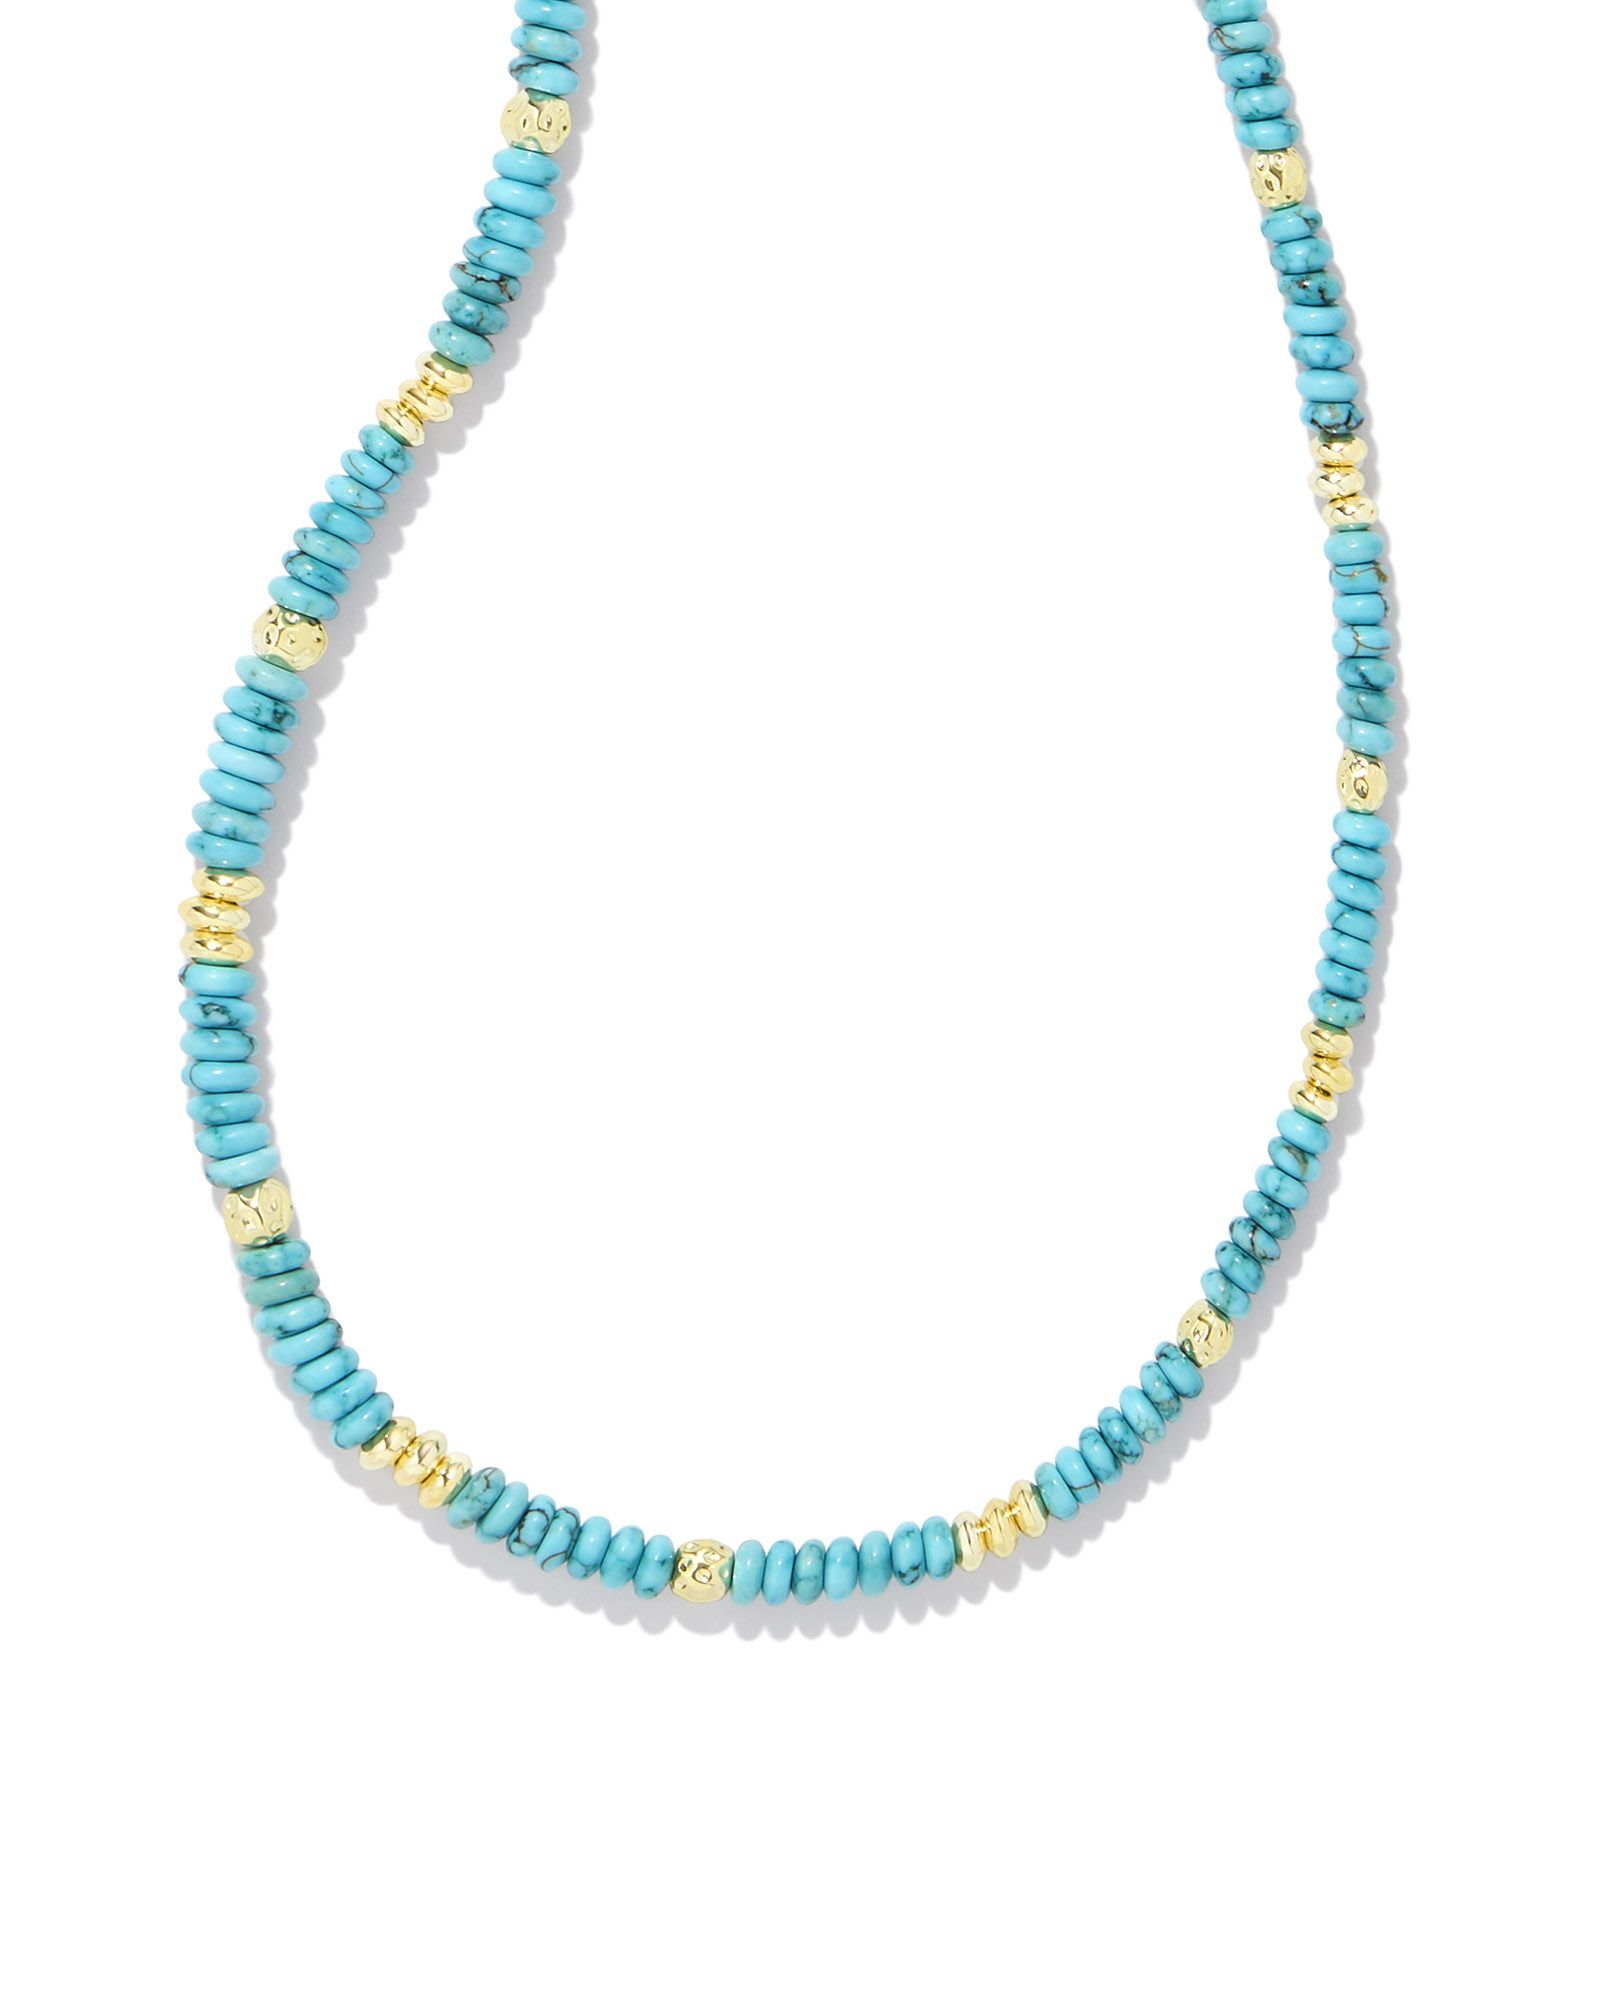 Deliah Gold Strand Necklace in Variegated Turquoise Magnesite | Kendra Scott